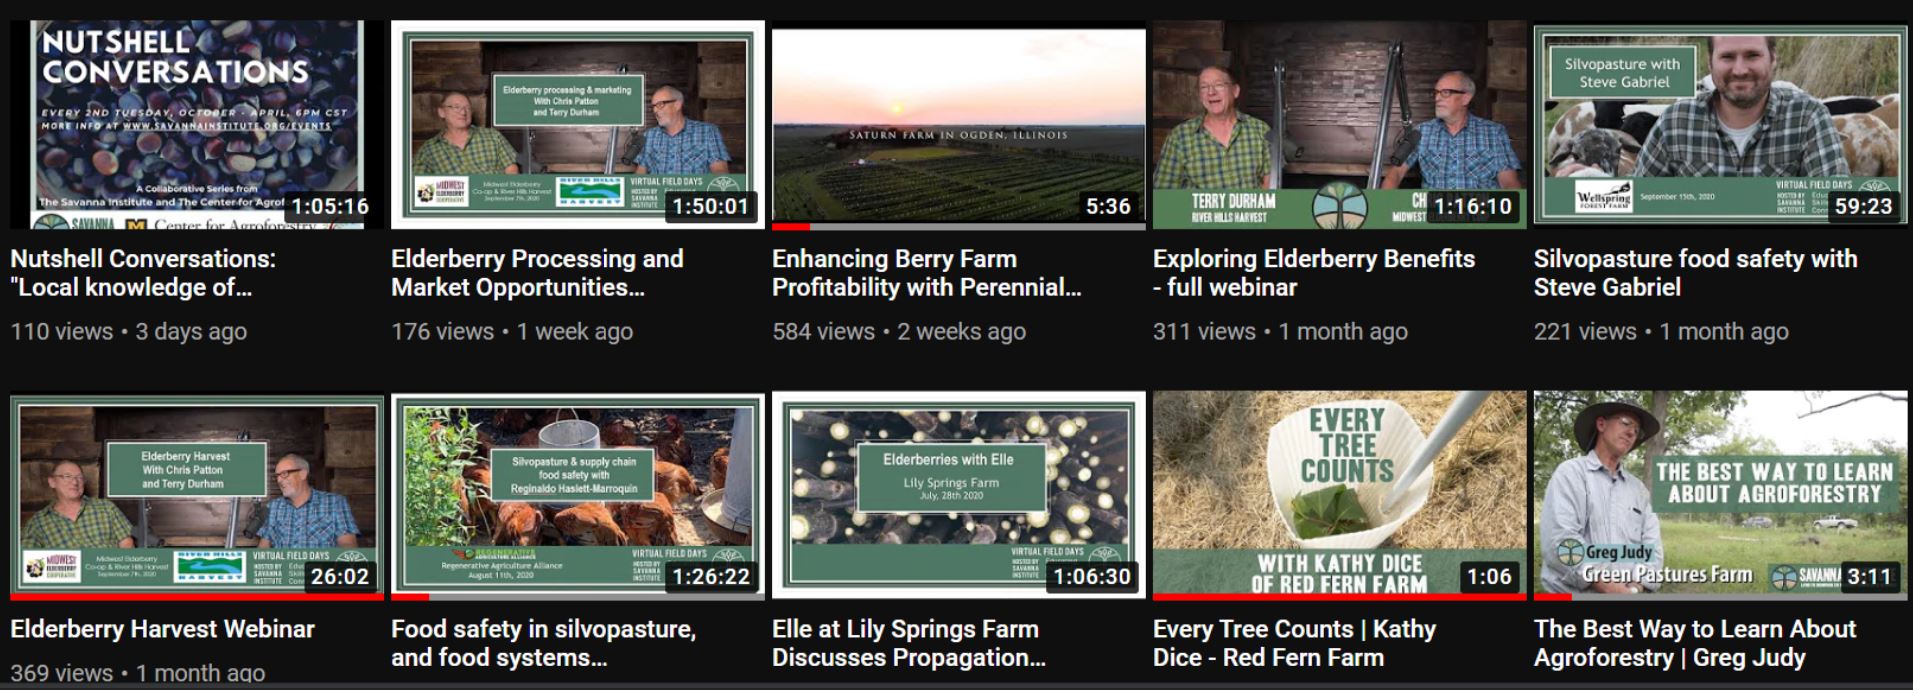 Figure 3: The course will make use of the Savanna Institute’s growing library of agroforestry resources, including its video library of interviews and virtual tours with experienced agroforestry farmers and researchers.